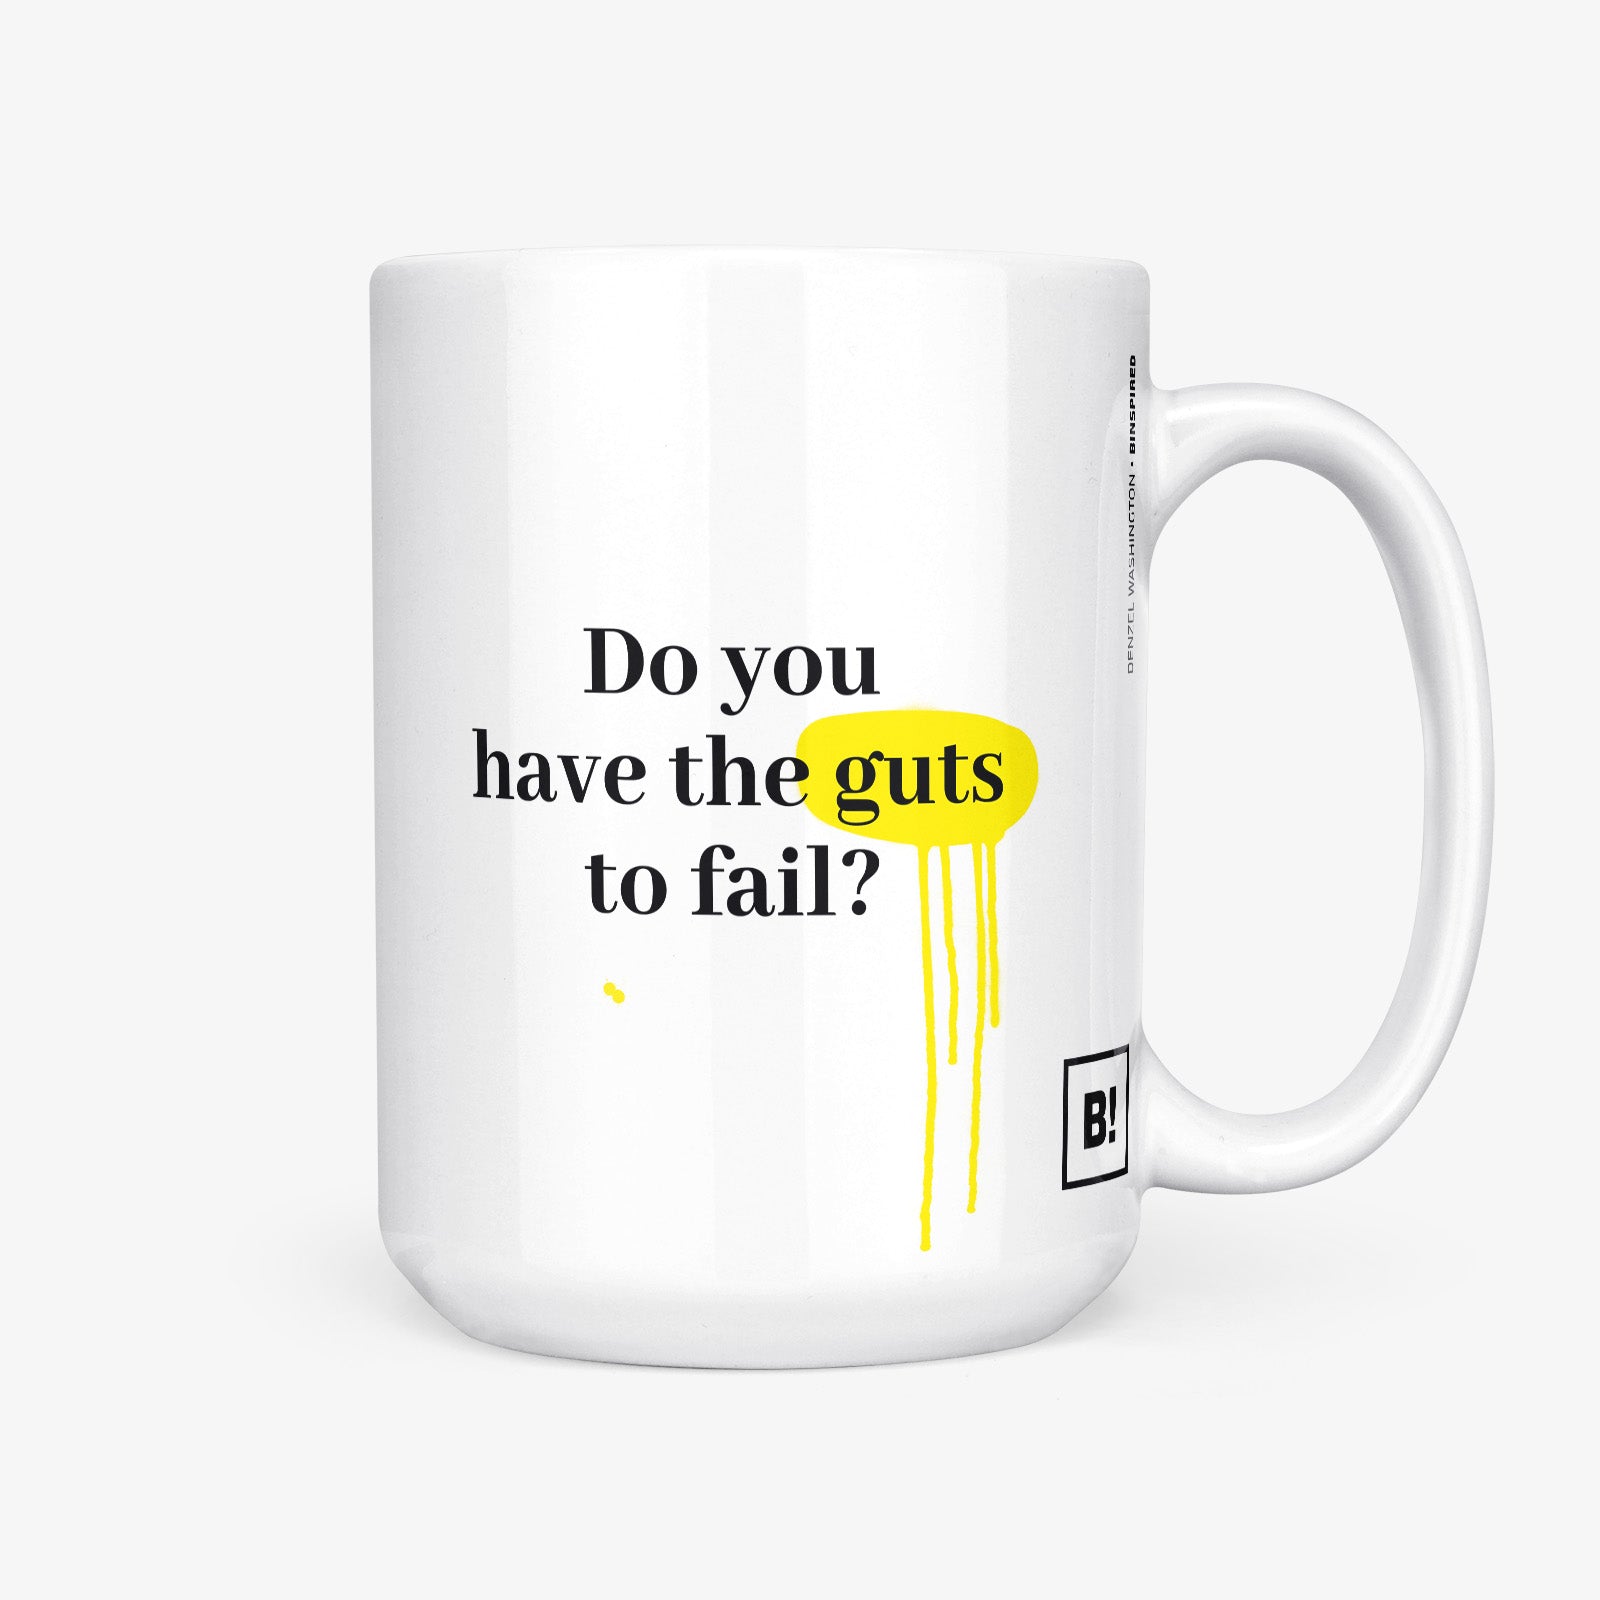 Be inspired by Denzel Washington's famous quote, "Do you have the guts to fail?" on this white and glossy 15oz coffee mug with the handle on the right.